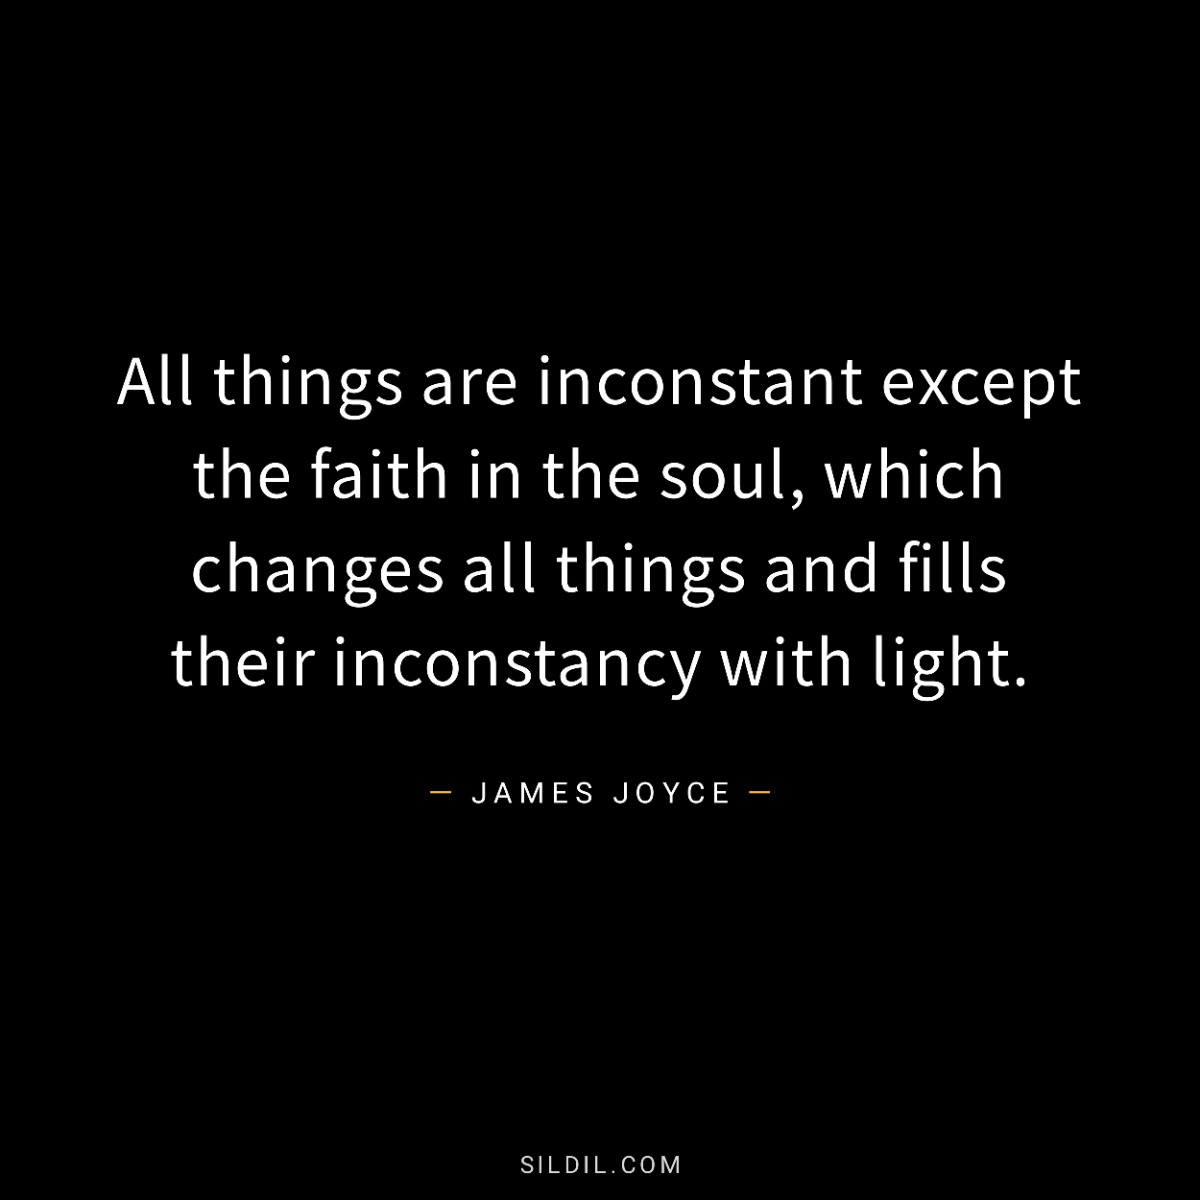 All things are inconstant except the faith in the soul, which changes all things and fills their inconstancy with light.